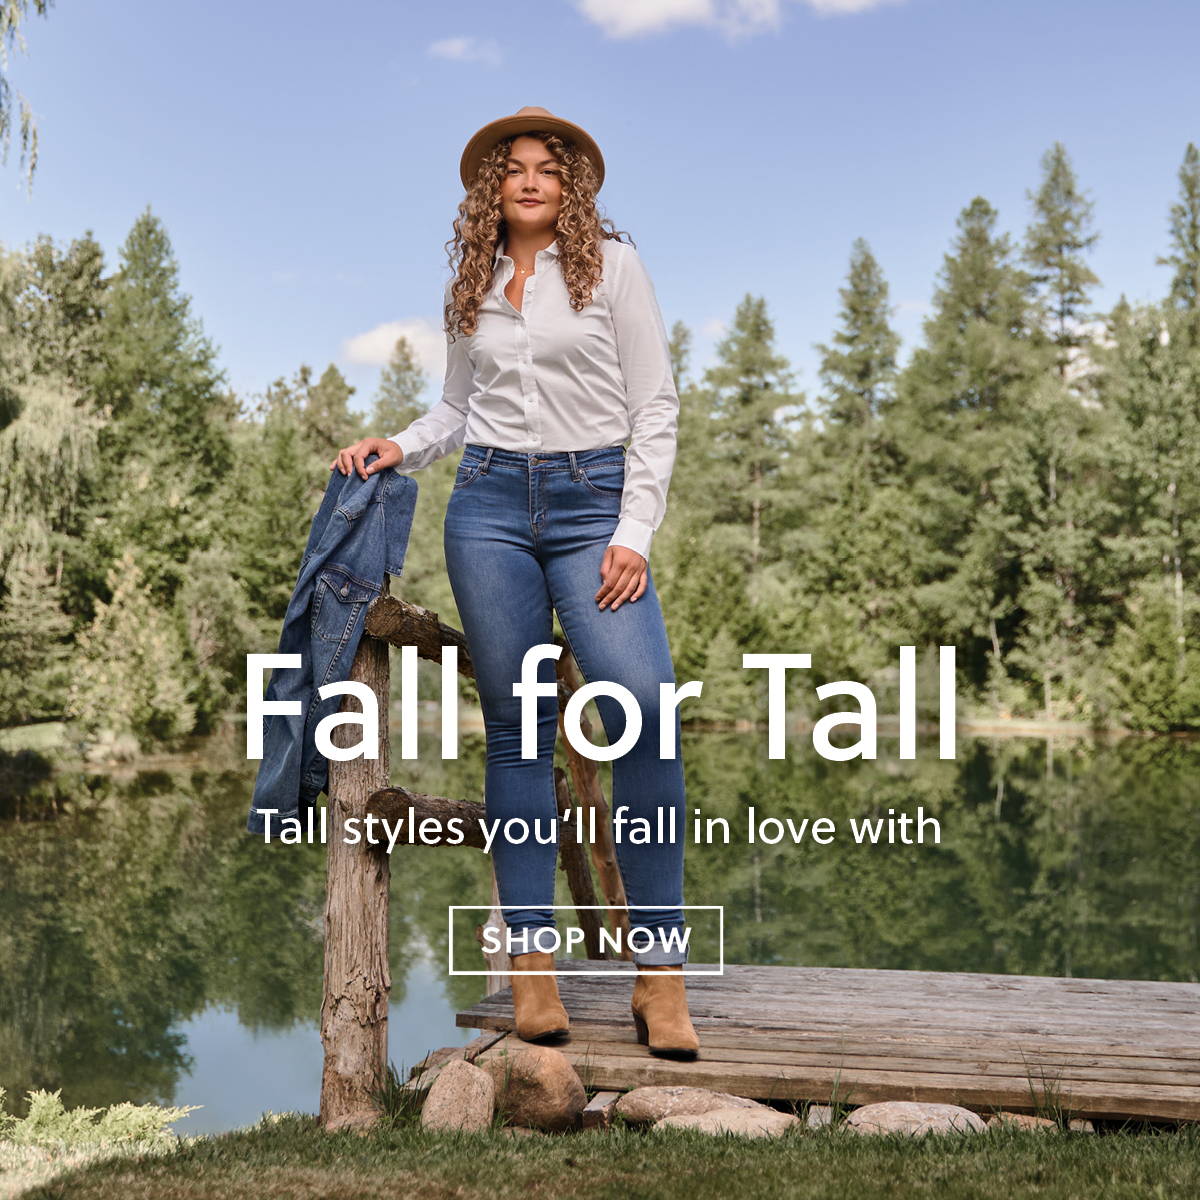 Fall for Tall. Shop styles you'll fall in love with by joyouslyvibrantlife.